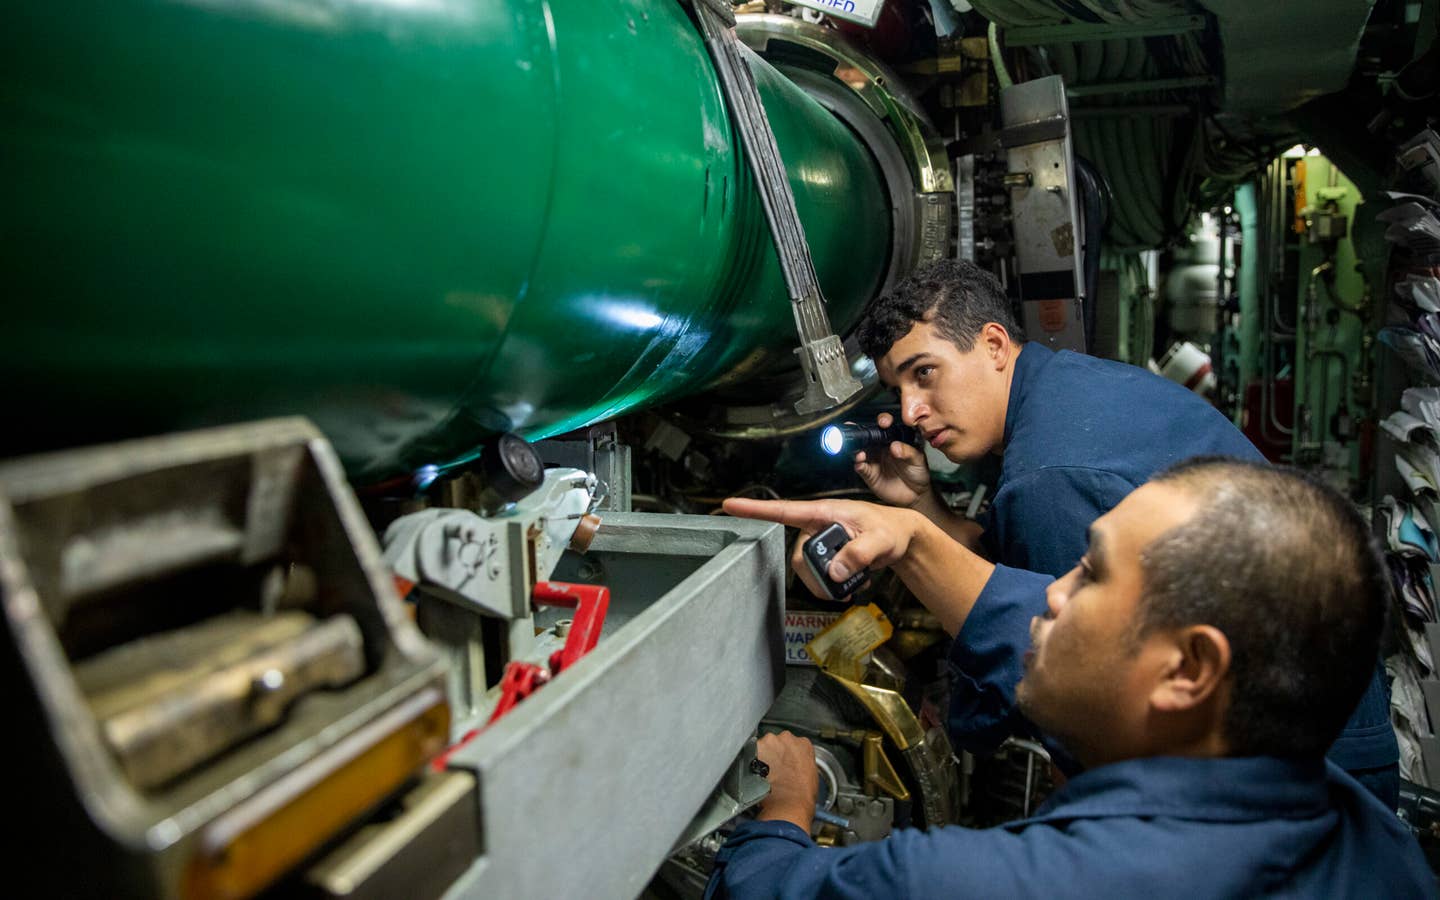 PHILIPPINE SEA (Jan. 26, 2023) – Chief Torpedoman’s Mate Christopher Collado (right), and Sonar Technician Submarines 3rd Class Steven Flores (left), assigned to the Los Angeles-class fast-attack submarine USS <em>Annapolis</em> (SSN 760), conduct torpedo offloading procedures in the torpedo room while underway, Jan. 26. Annapolis is conducting maritime operations in the U.S. 7th Fleet area of operations to maintain a safe and open Indo-Pacific. (U.S. Navy photo by Mass Communication Specialist Seaman Darek Leary)